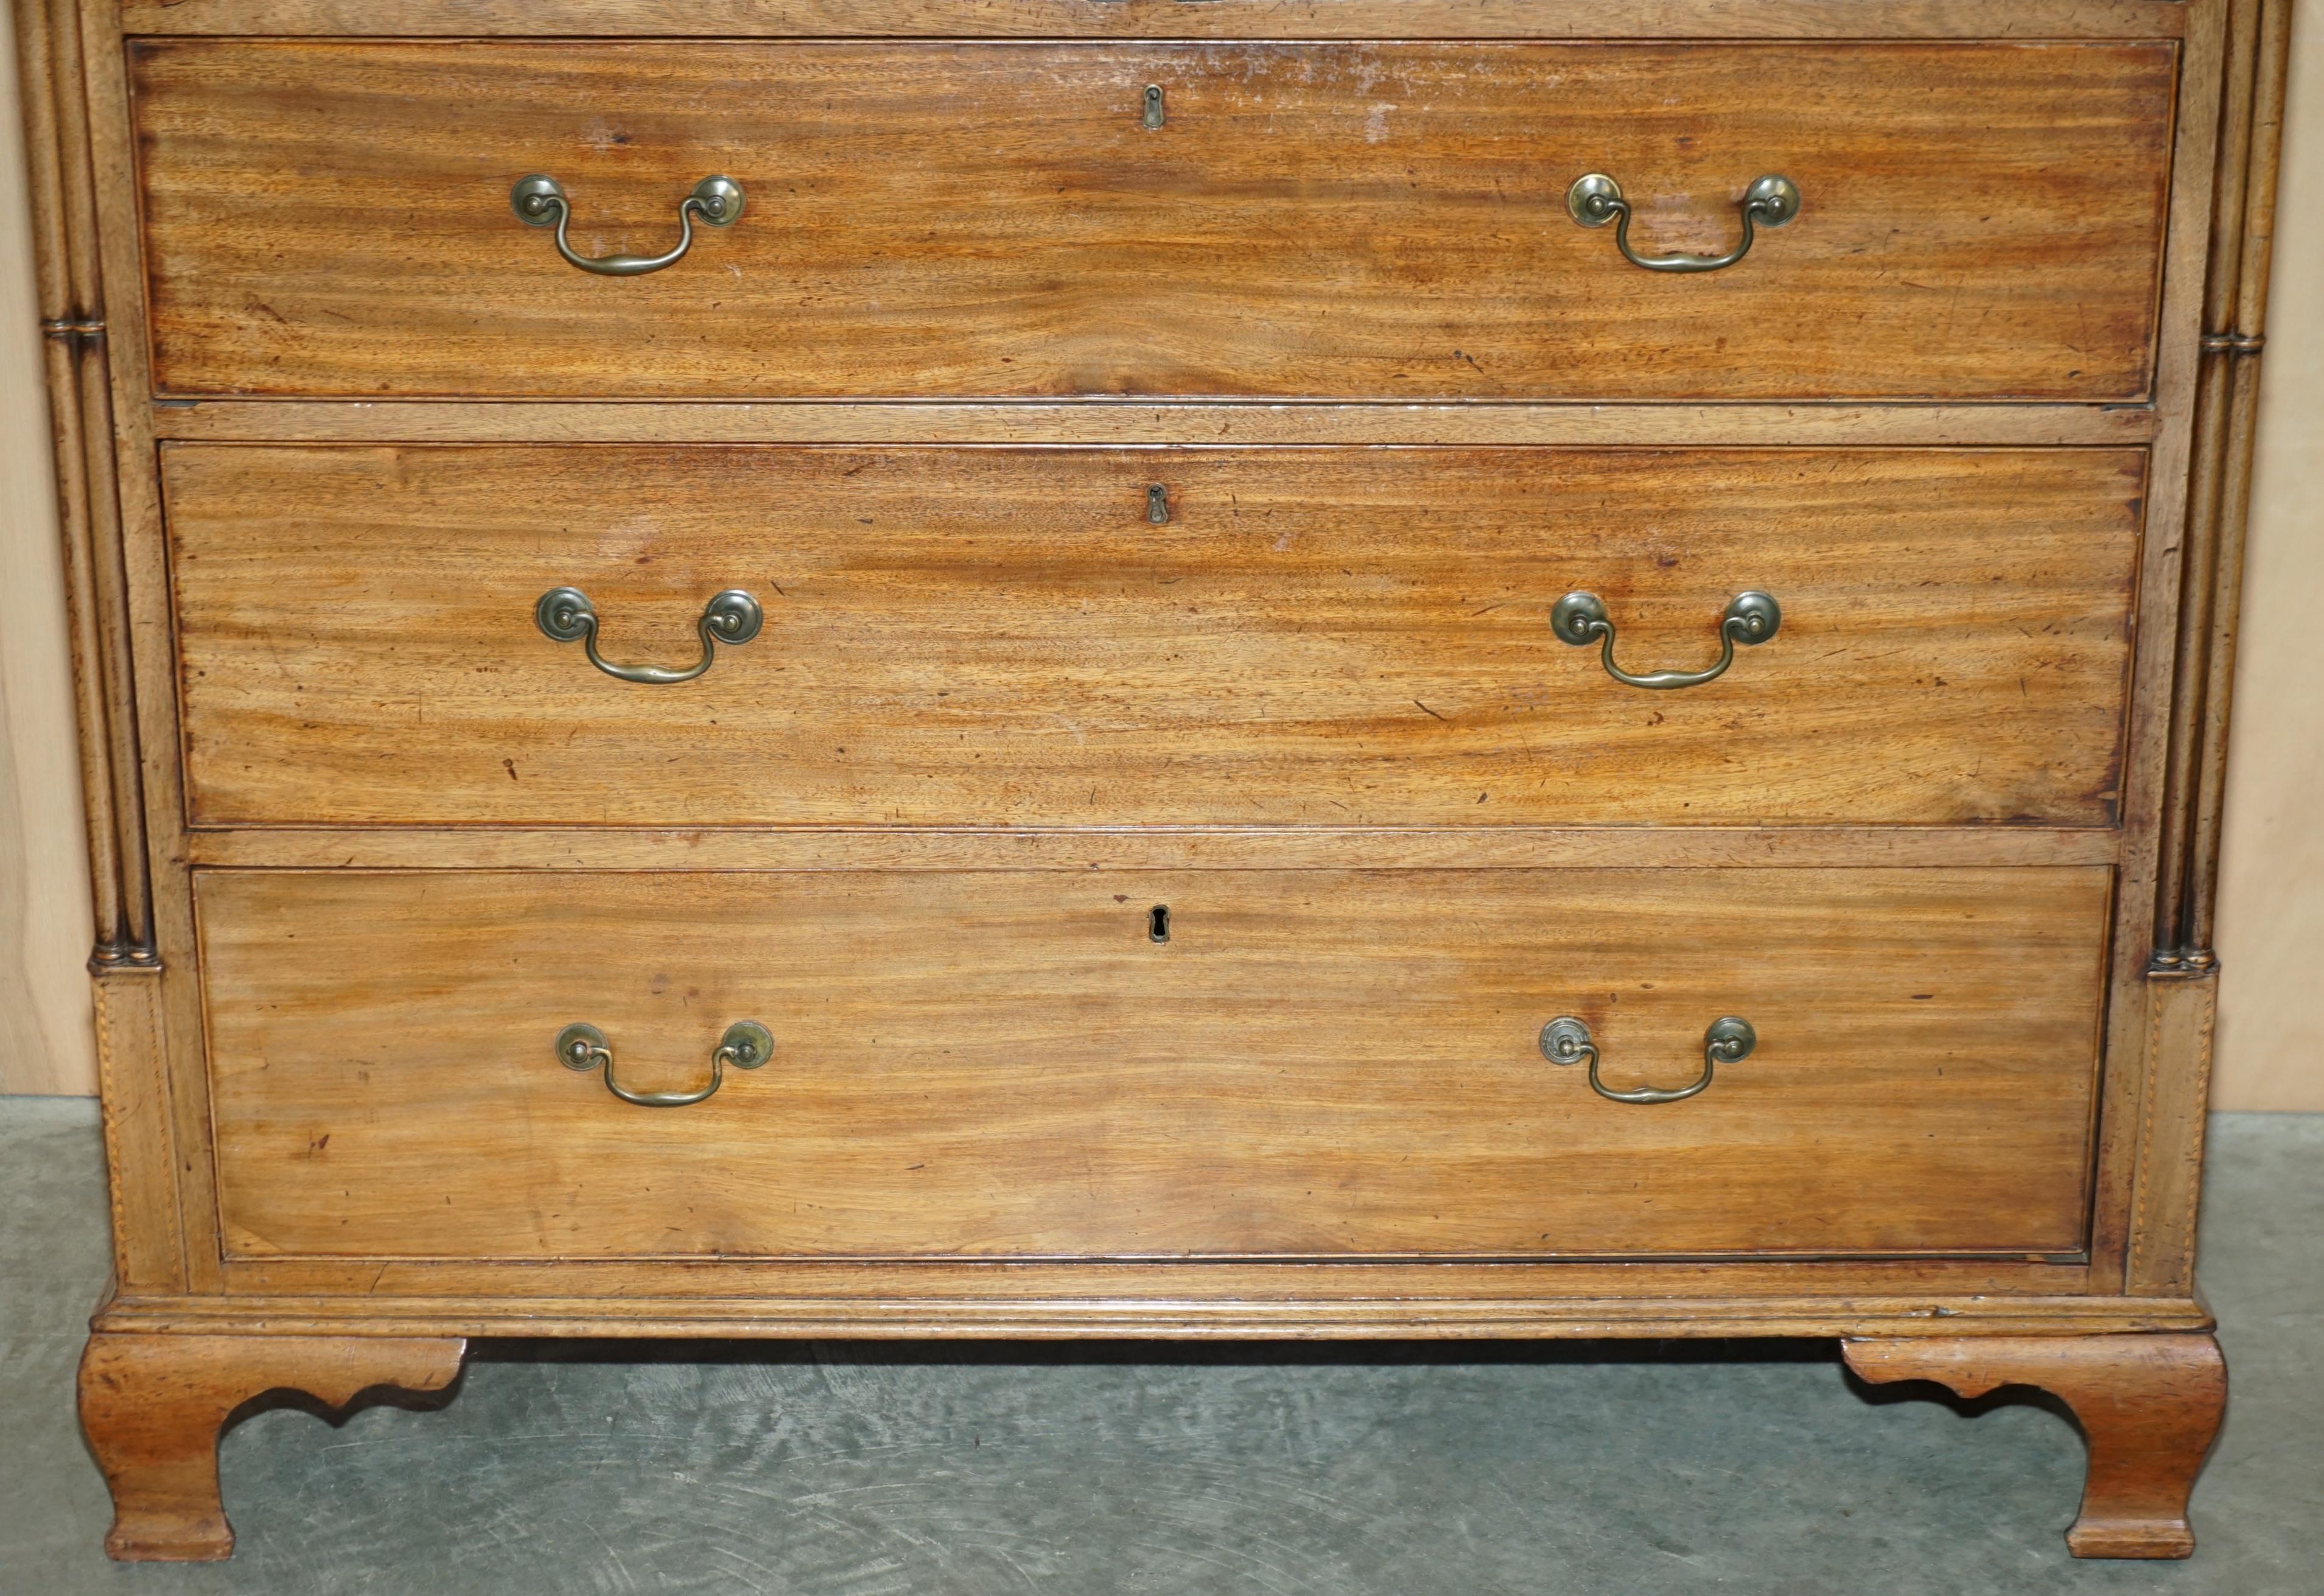 LARGE FiNE ANTIQUE THOMAS CHIPPENDALE SHERATON REVIVAL HARDWOOD CHEST OF DRAWERS For Sale 2